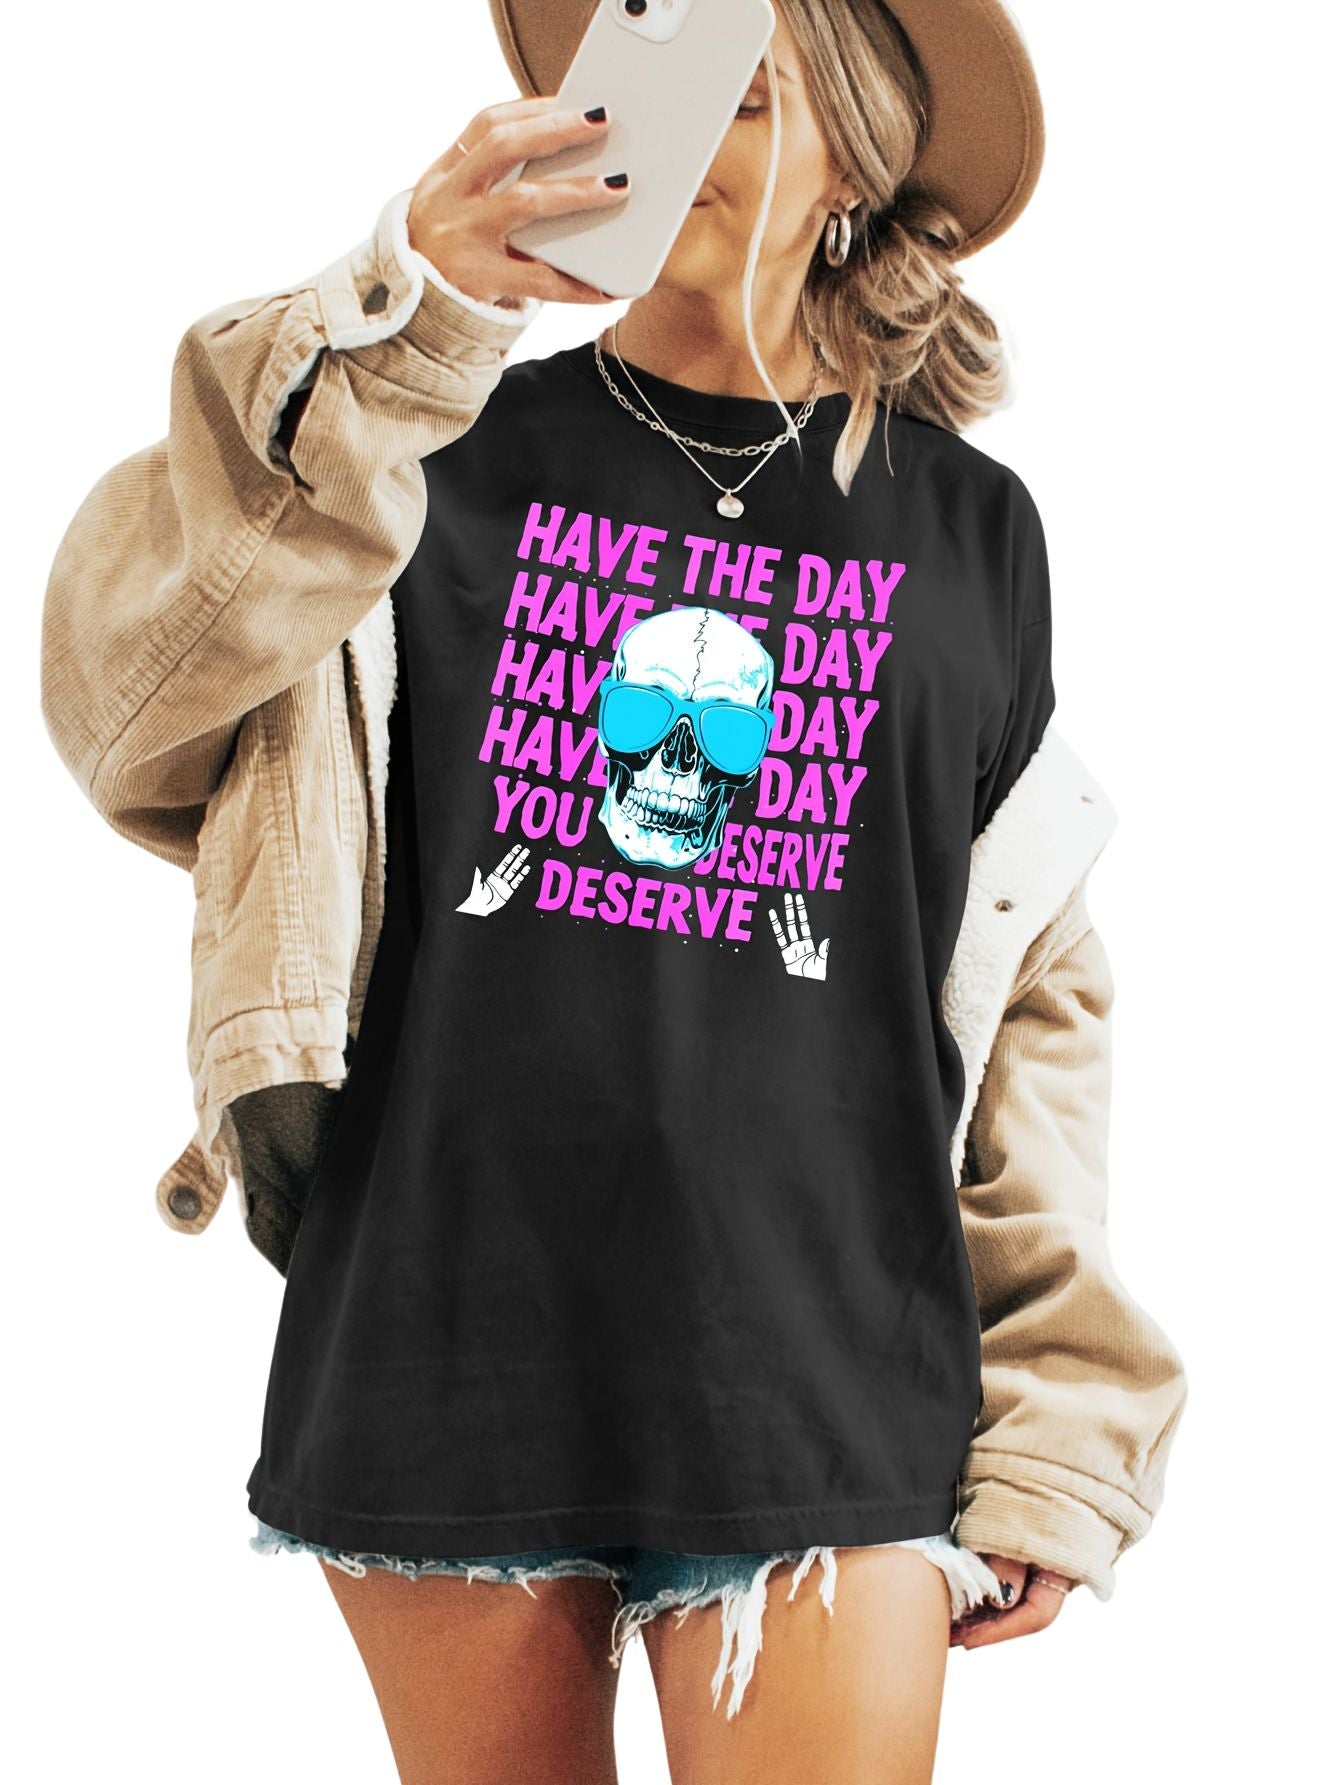 Skull Patterned Crew Neck T-shirt: Vintage Style Women's Top for Spring & Summer